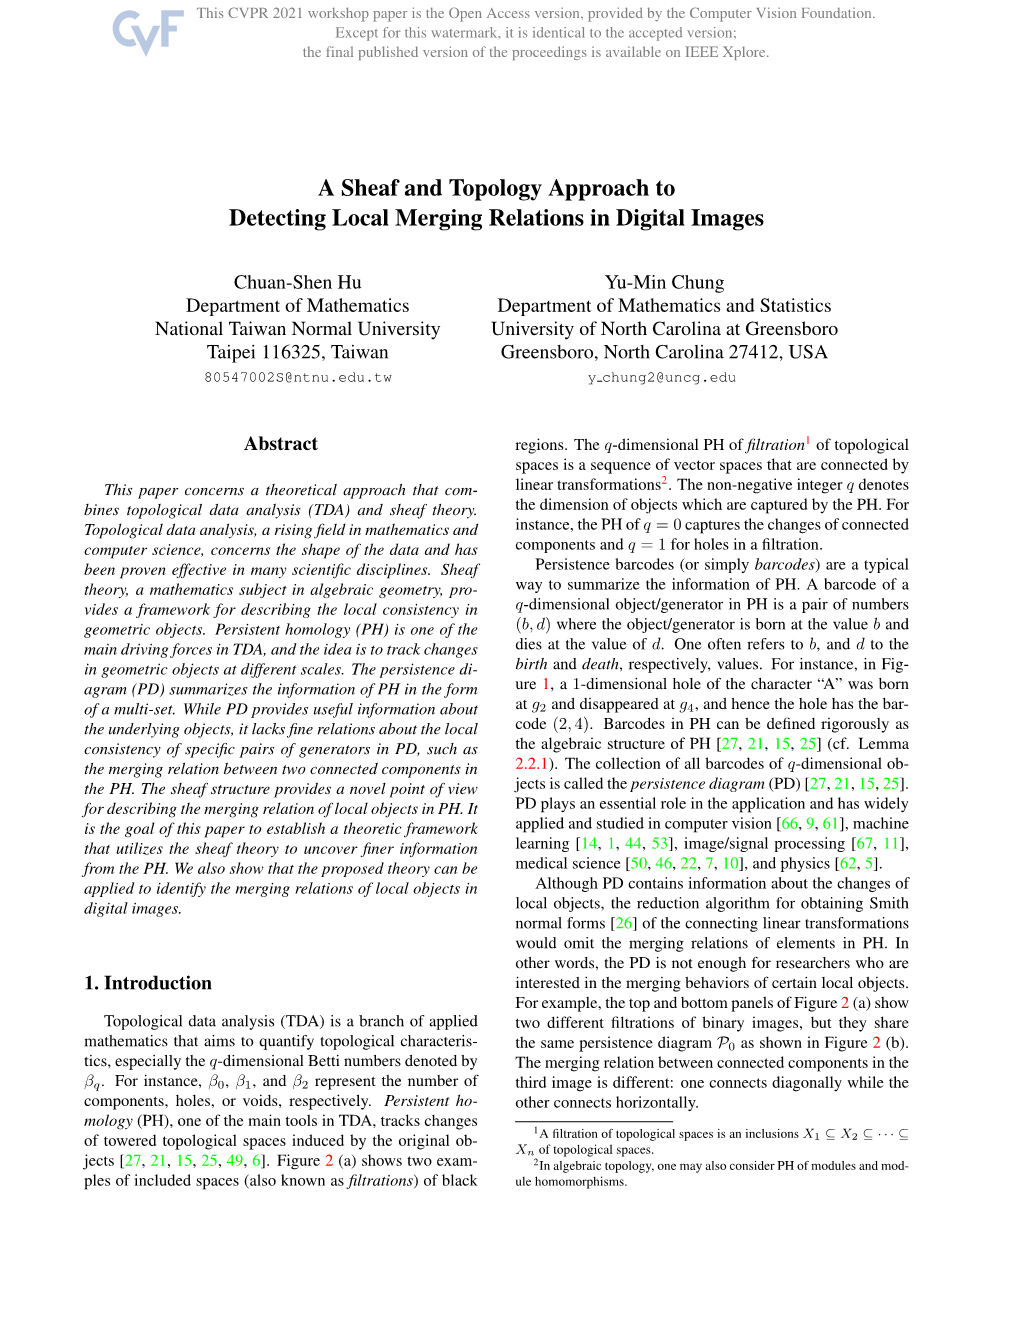 A Sheaf and Topology Approach to Detecting Local Merging Relations in Digital Images